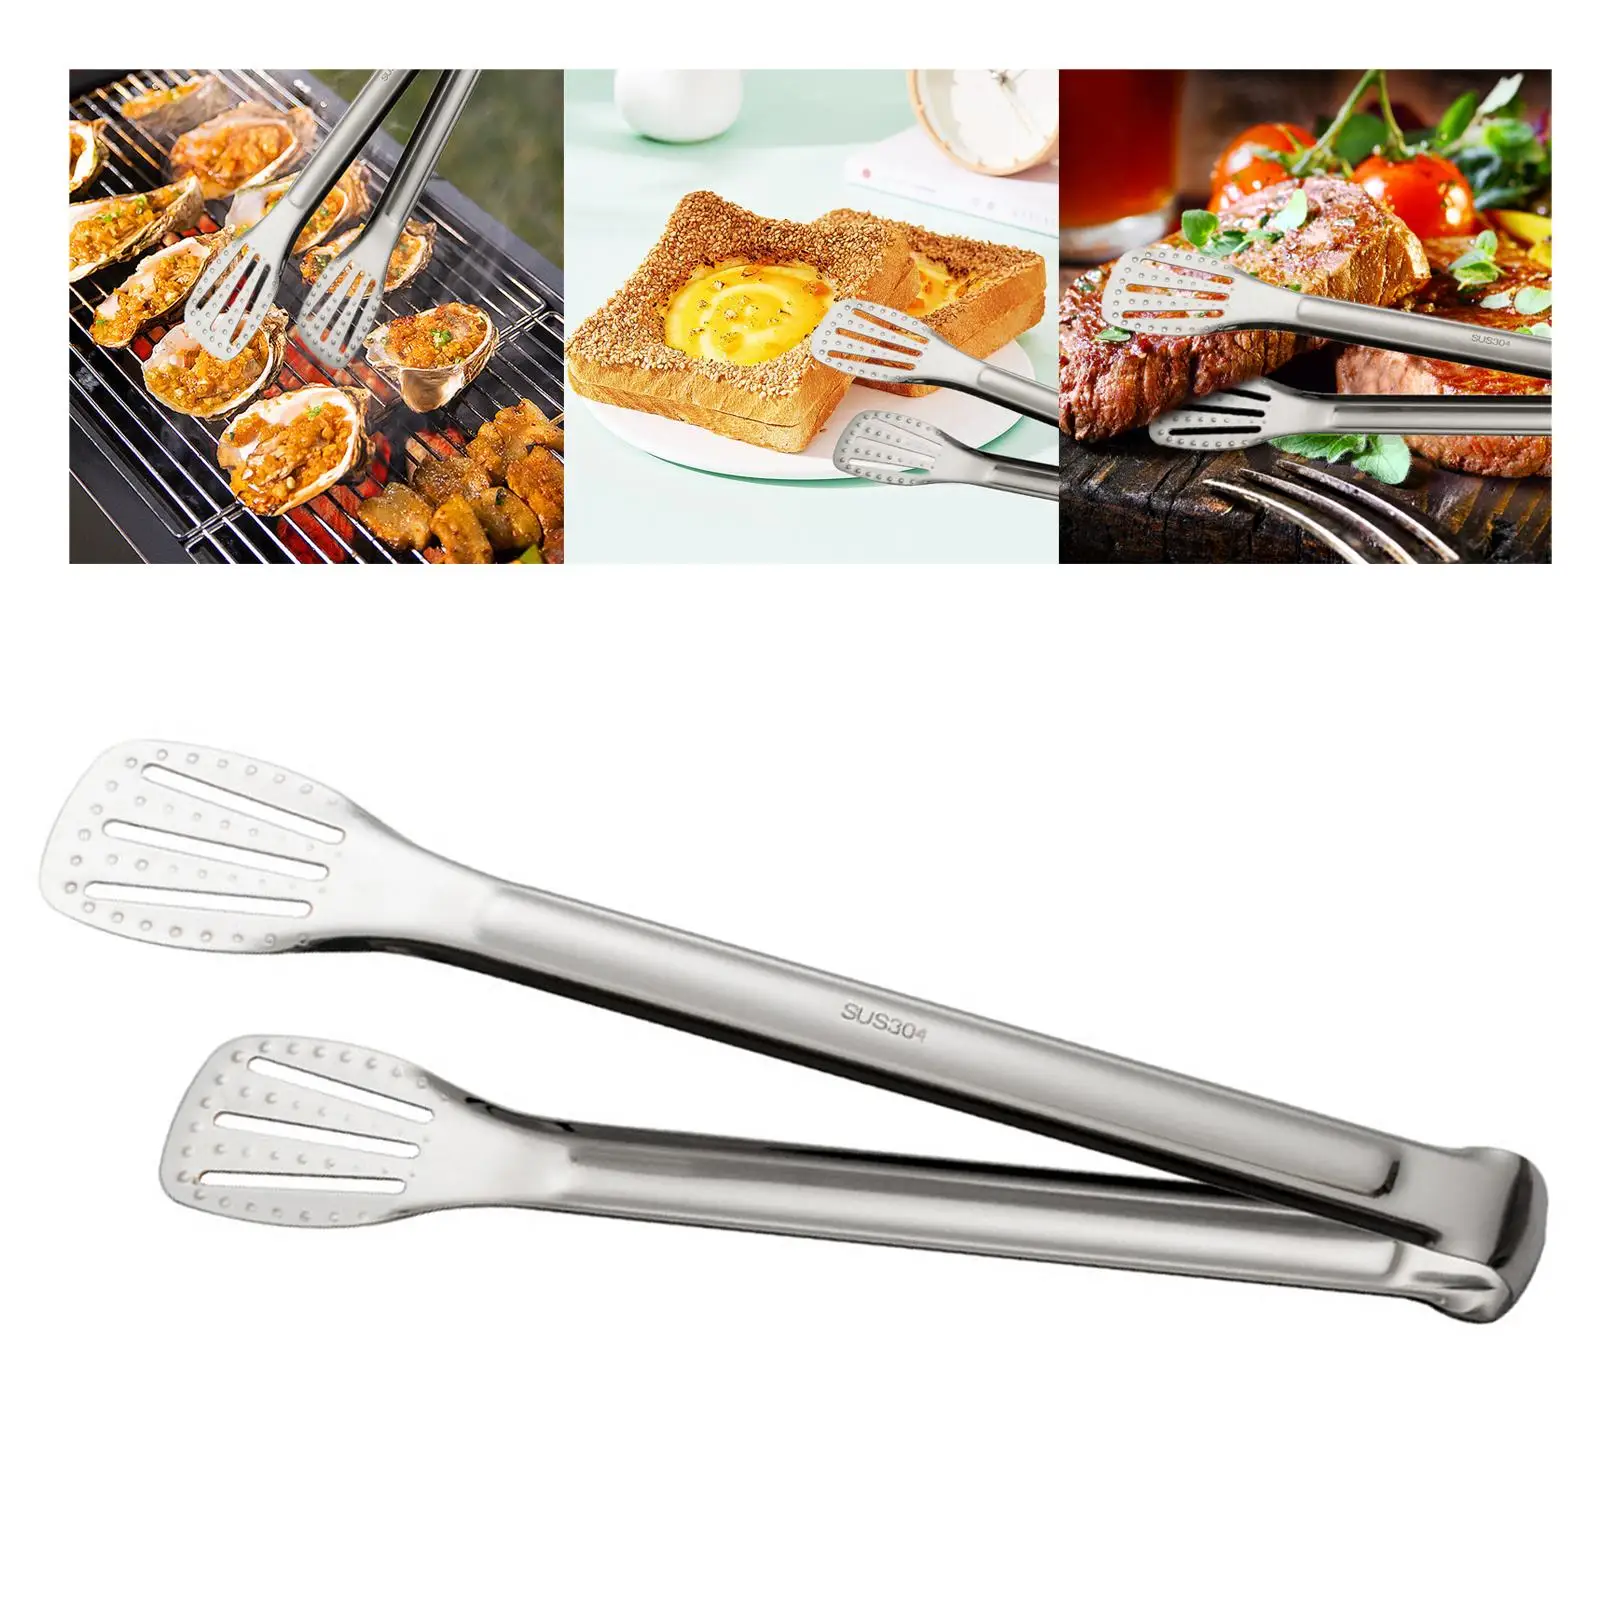 304 Stainless Steel Kitchen Tongs Non Slip Serving Heat Resistant Bread Baking Steak Clamp Frying Clip for BBQ Grilling Cooking